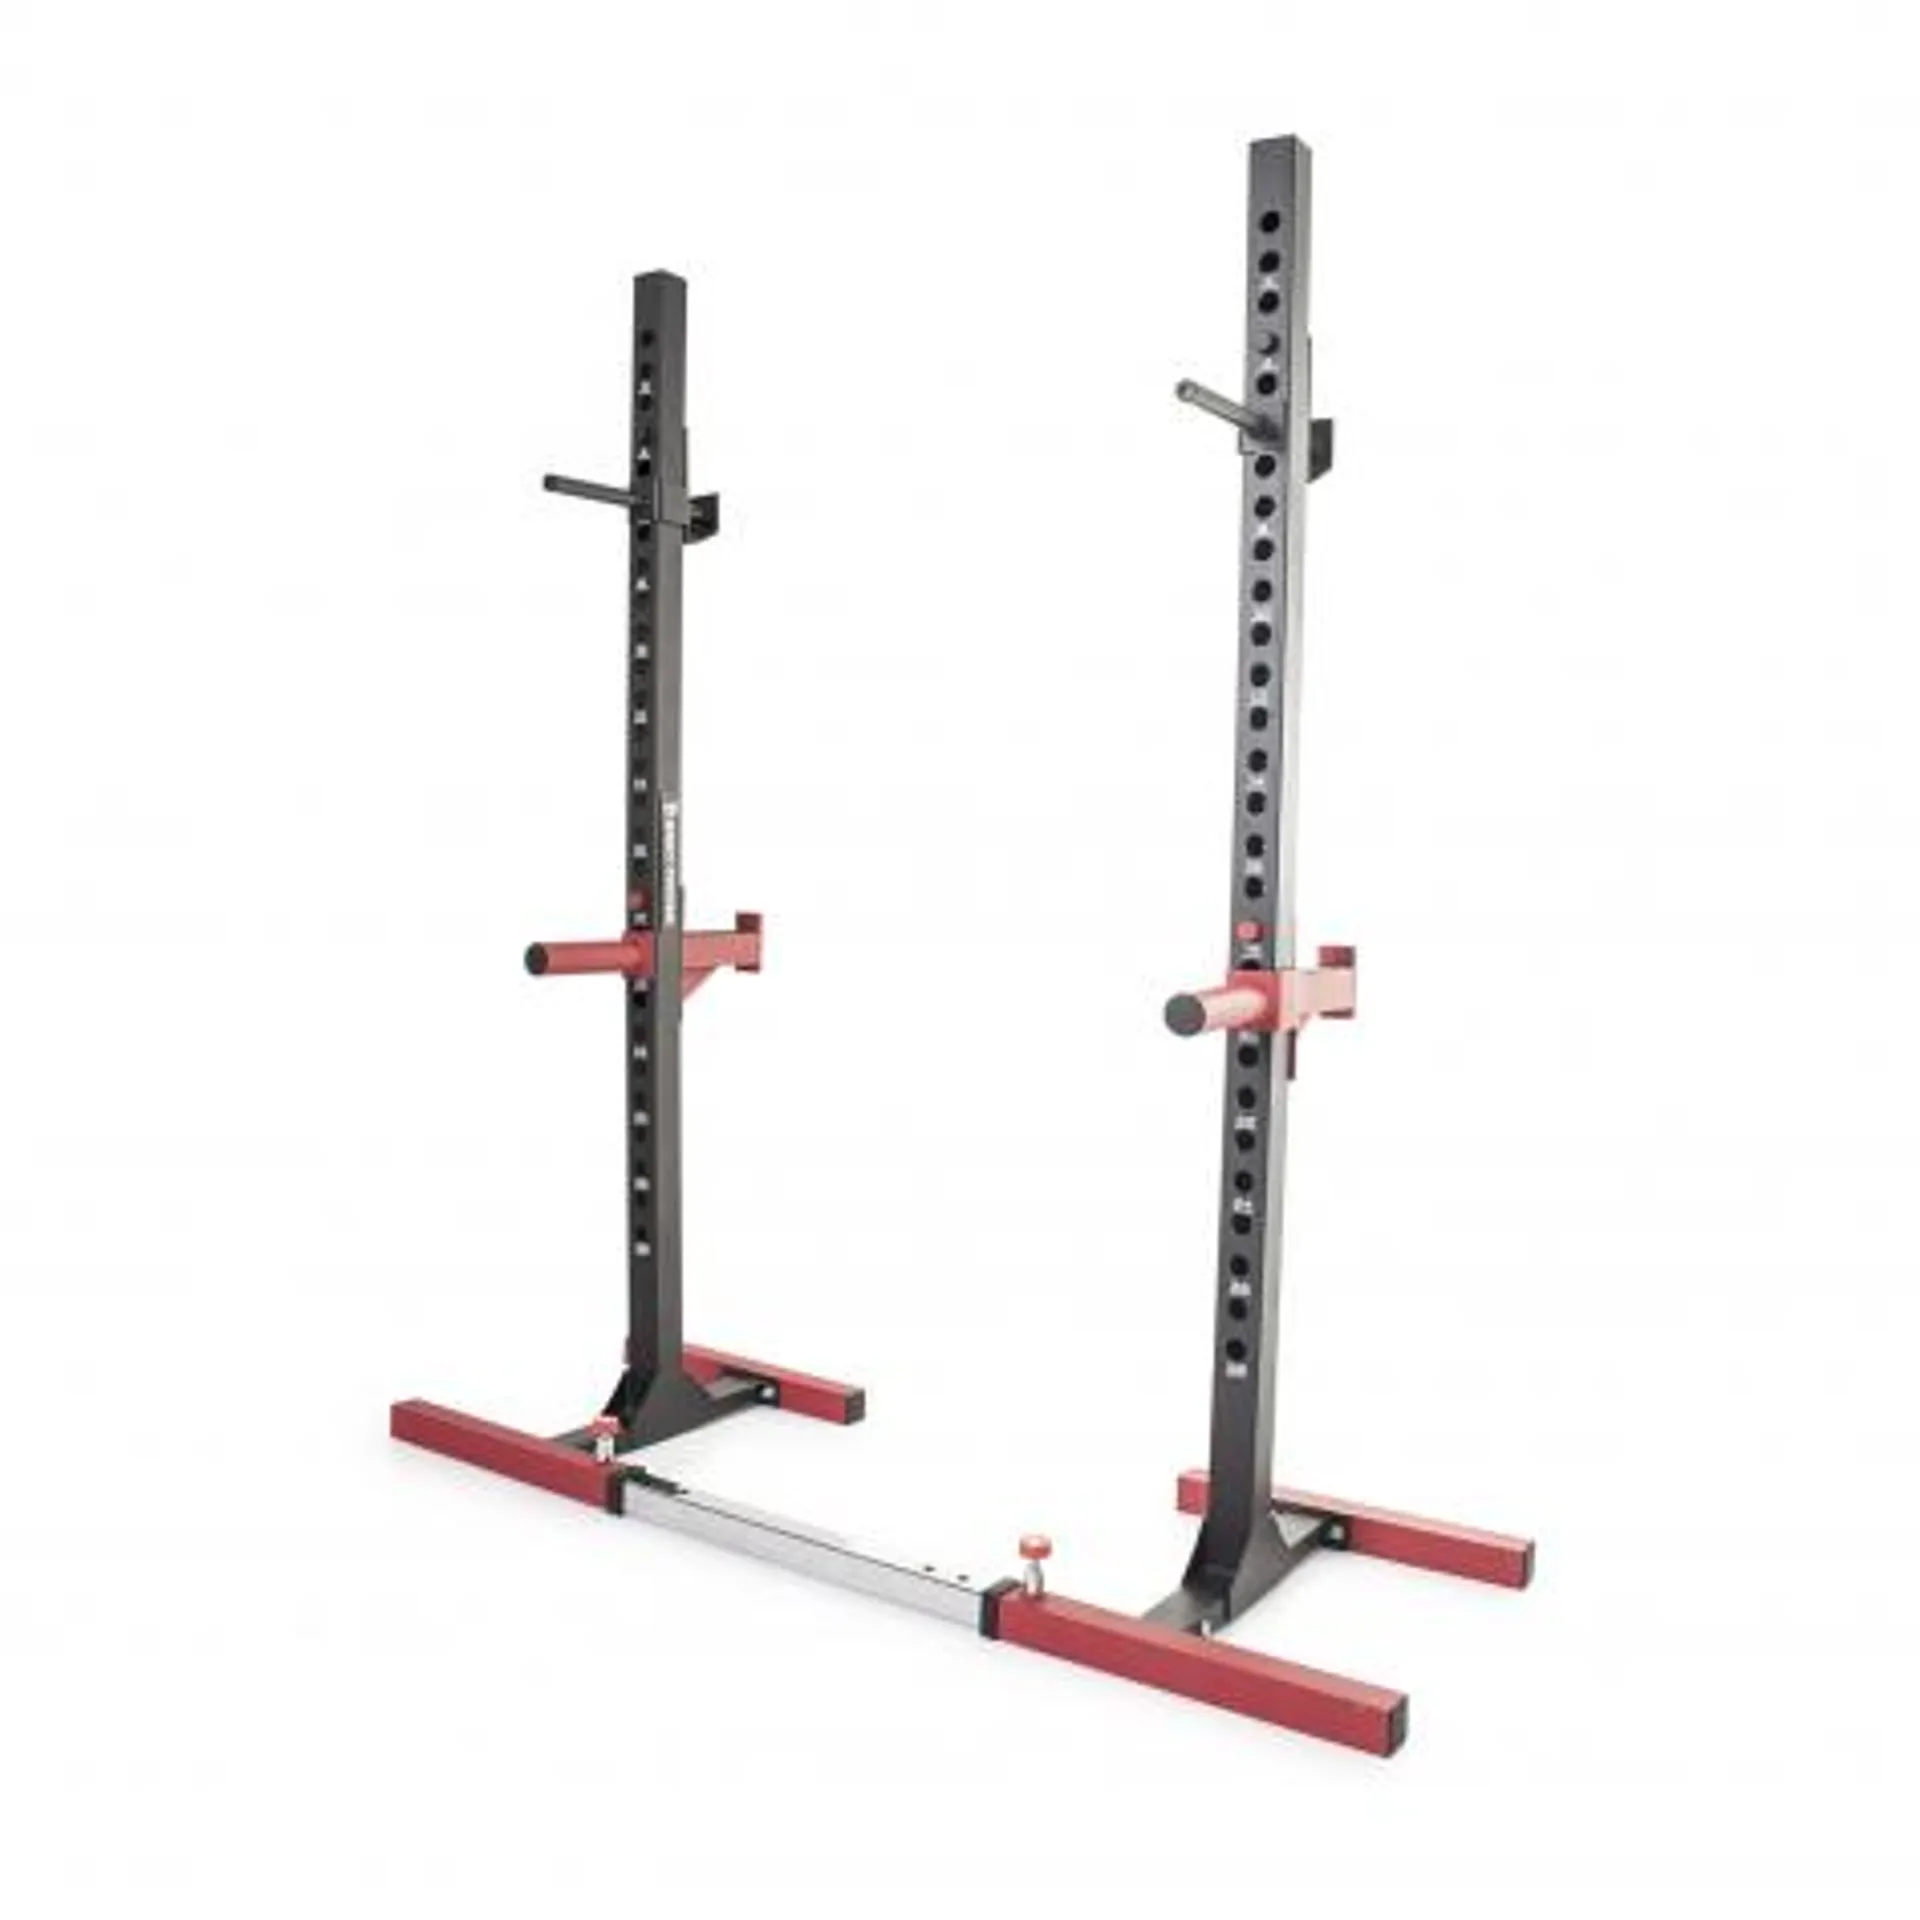 Body Power Adjustable Width Squat Stand - Northampton Ex-Display Product